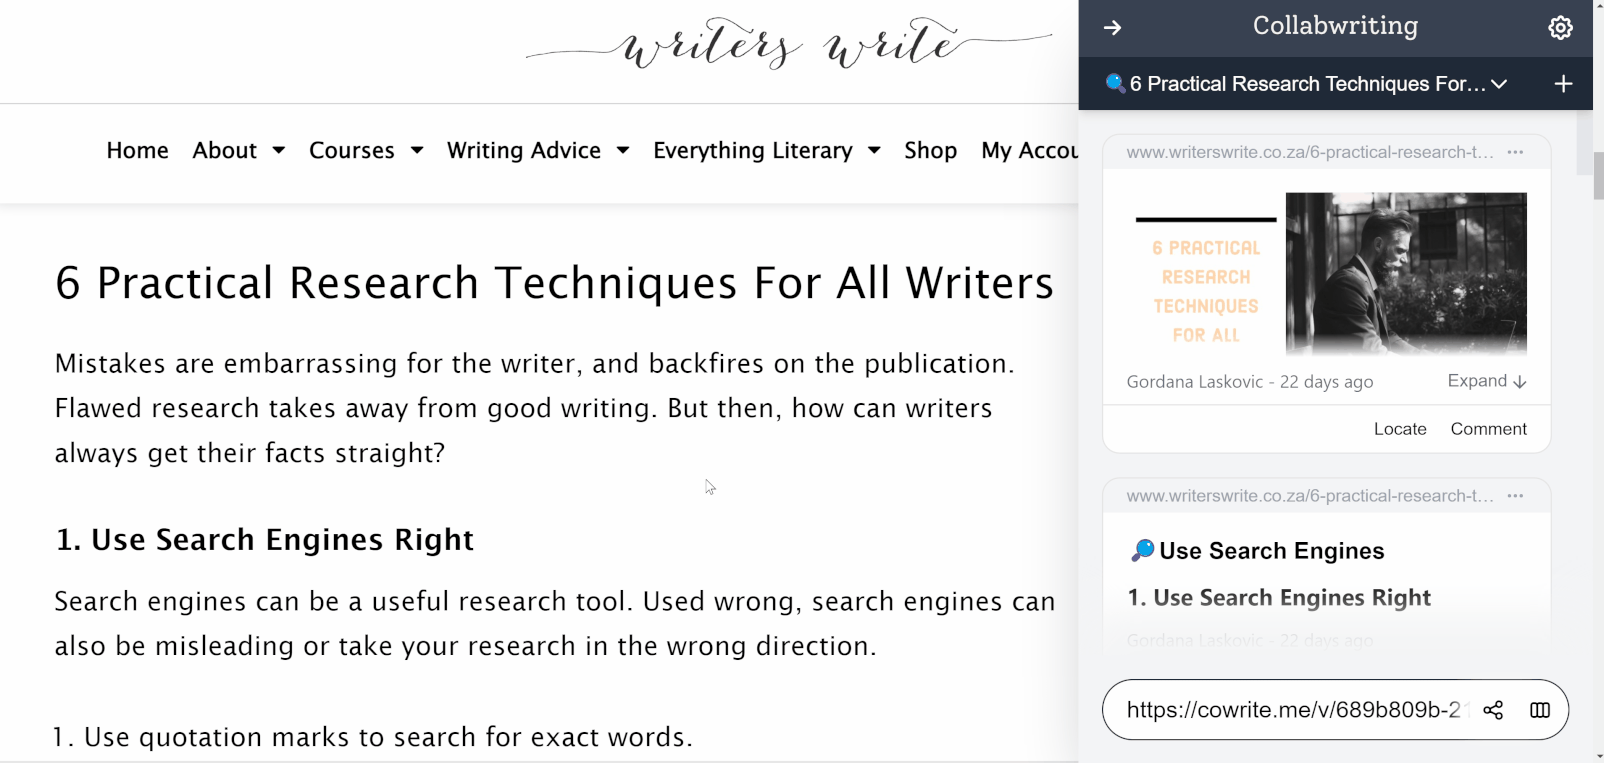 Content Research with Collabwriting